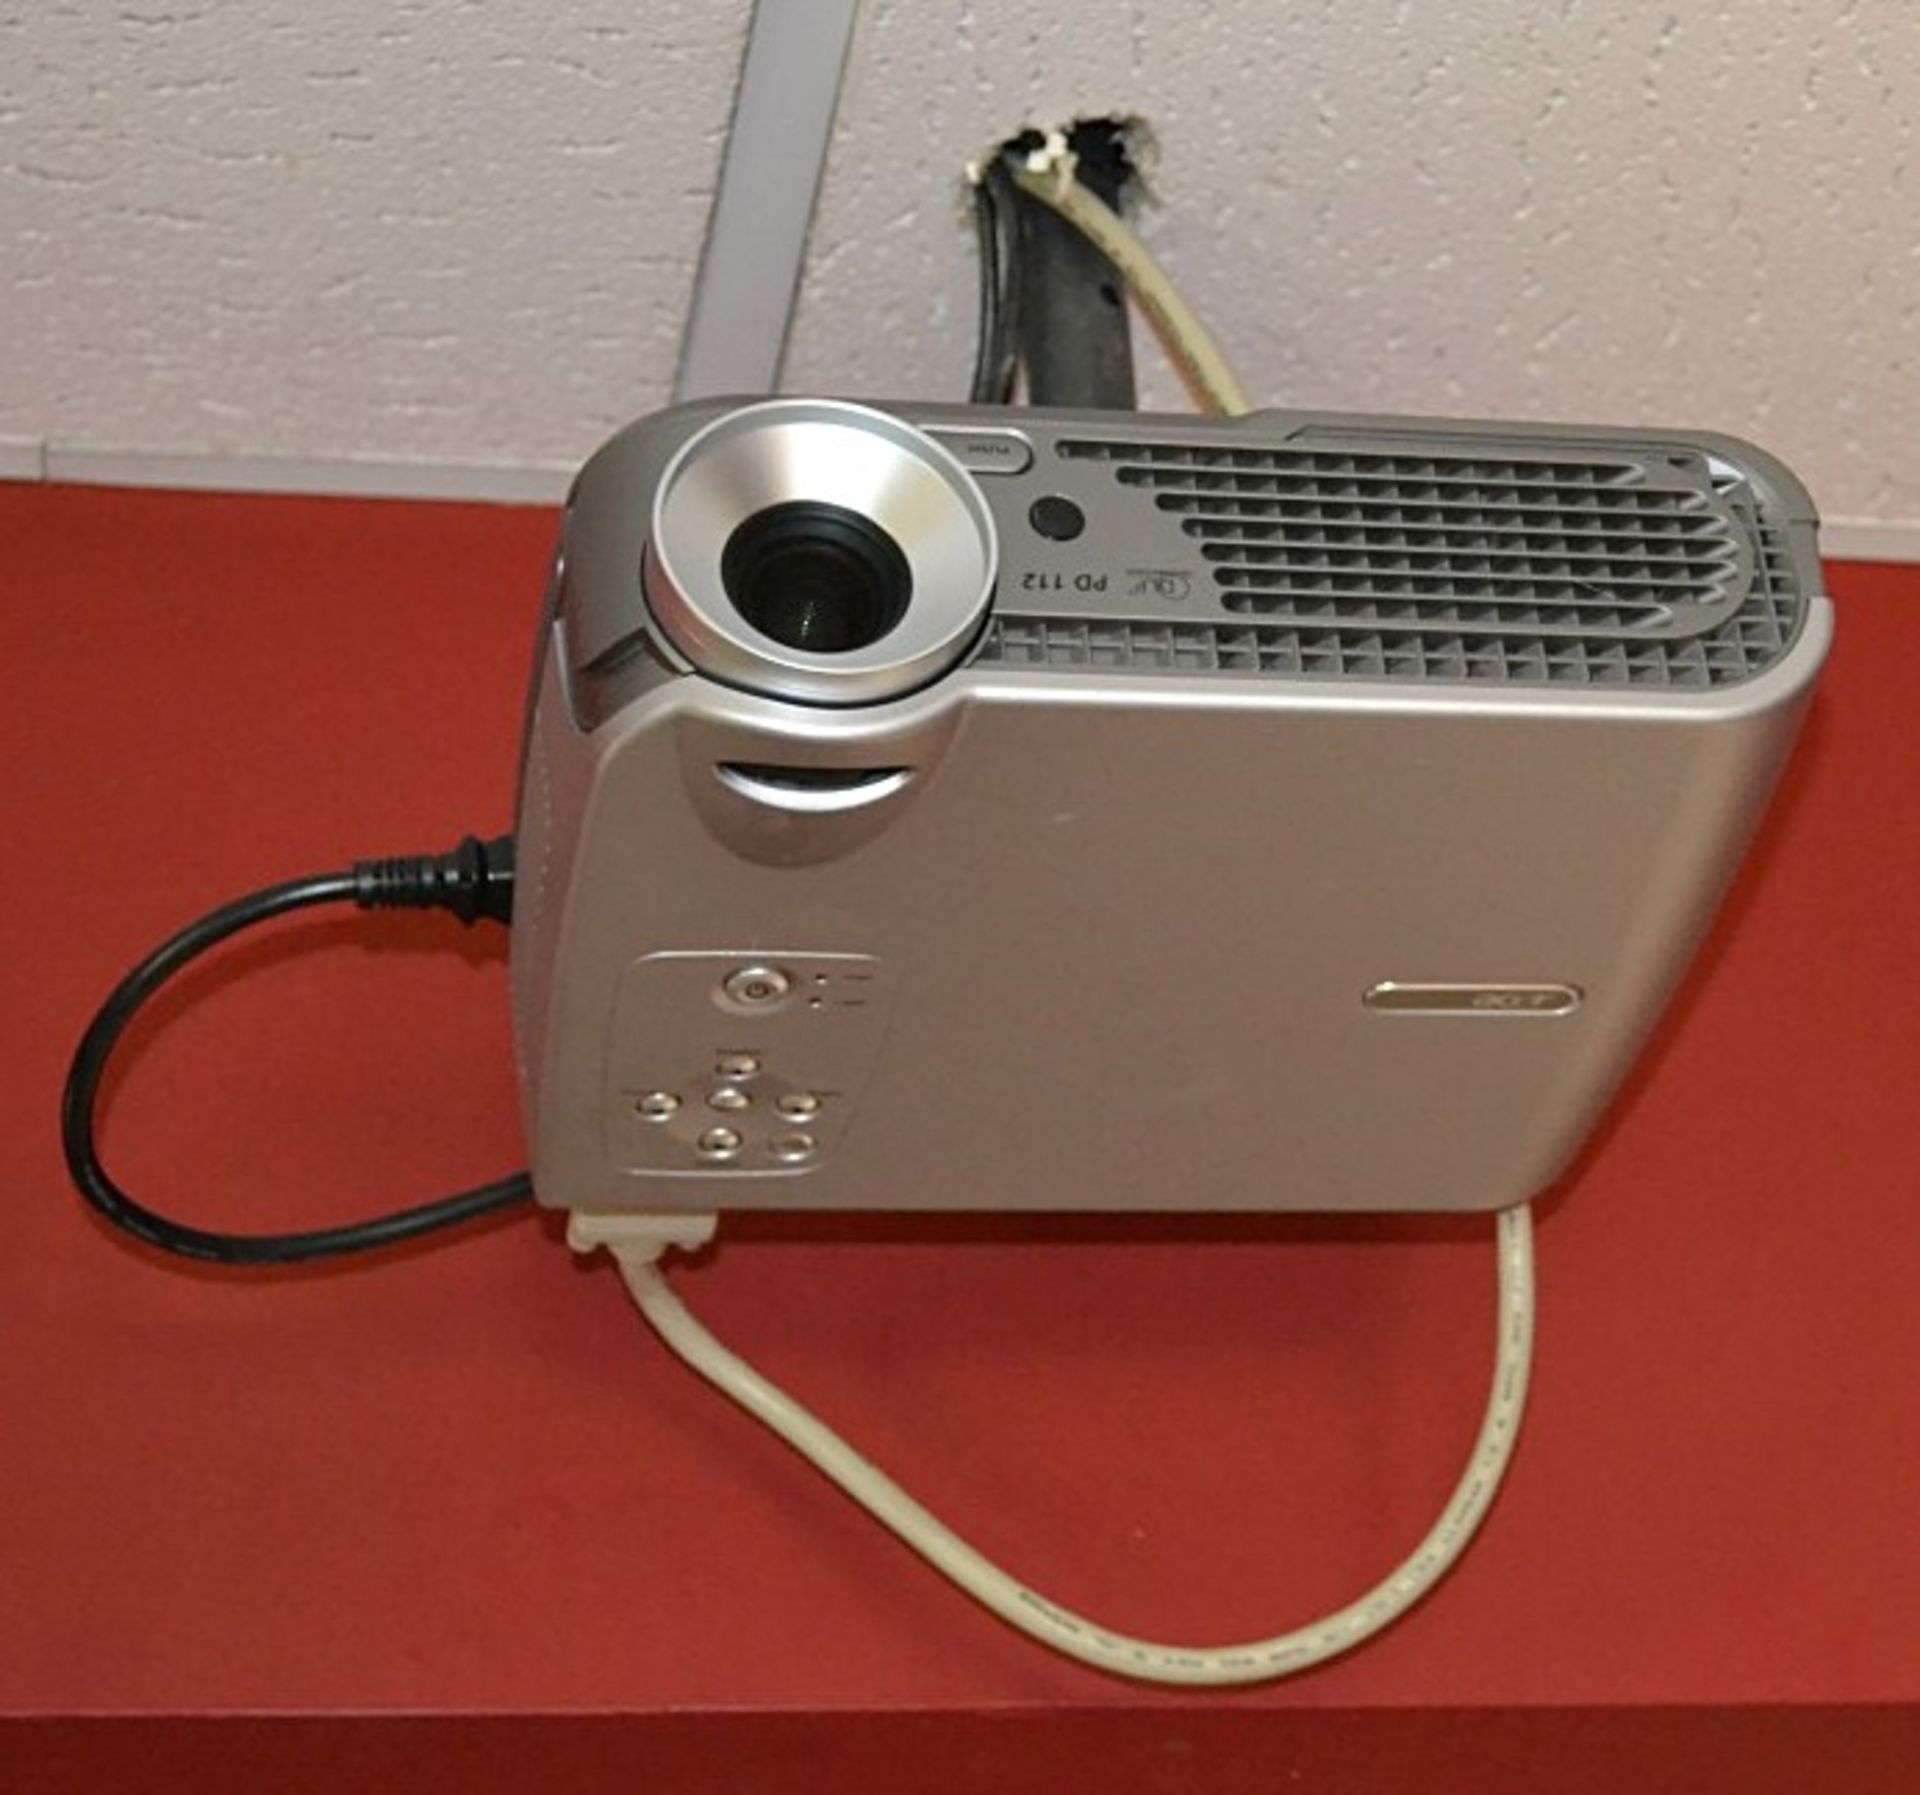 1 x Acer PD112 DLP Projector - Preowned In Good Working Condition With Case And Assorted Leads As